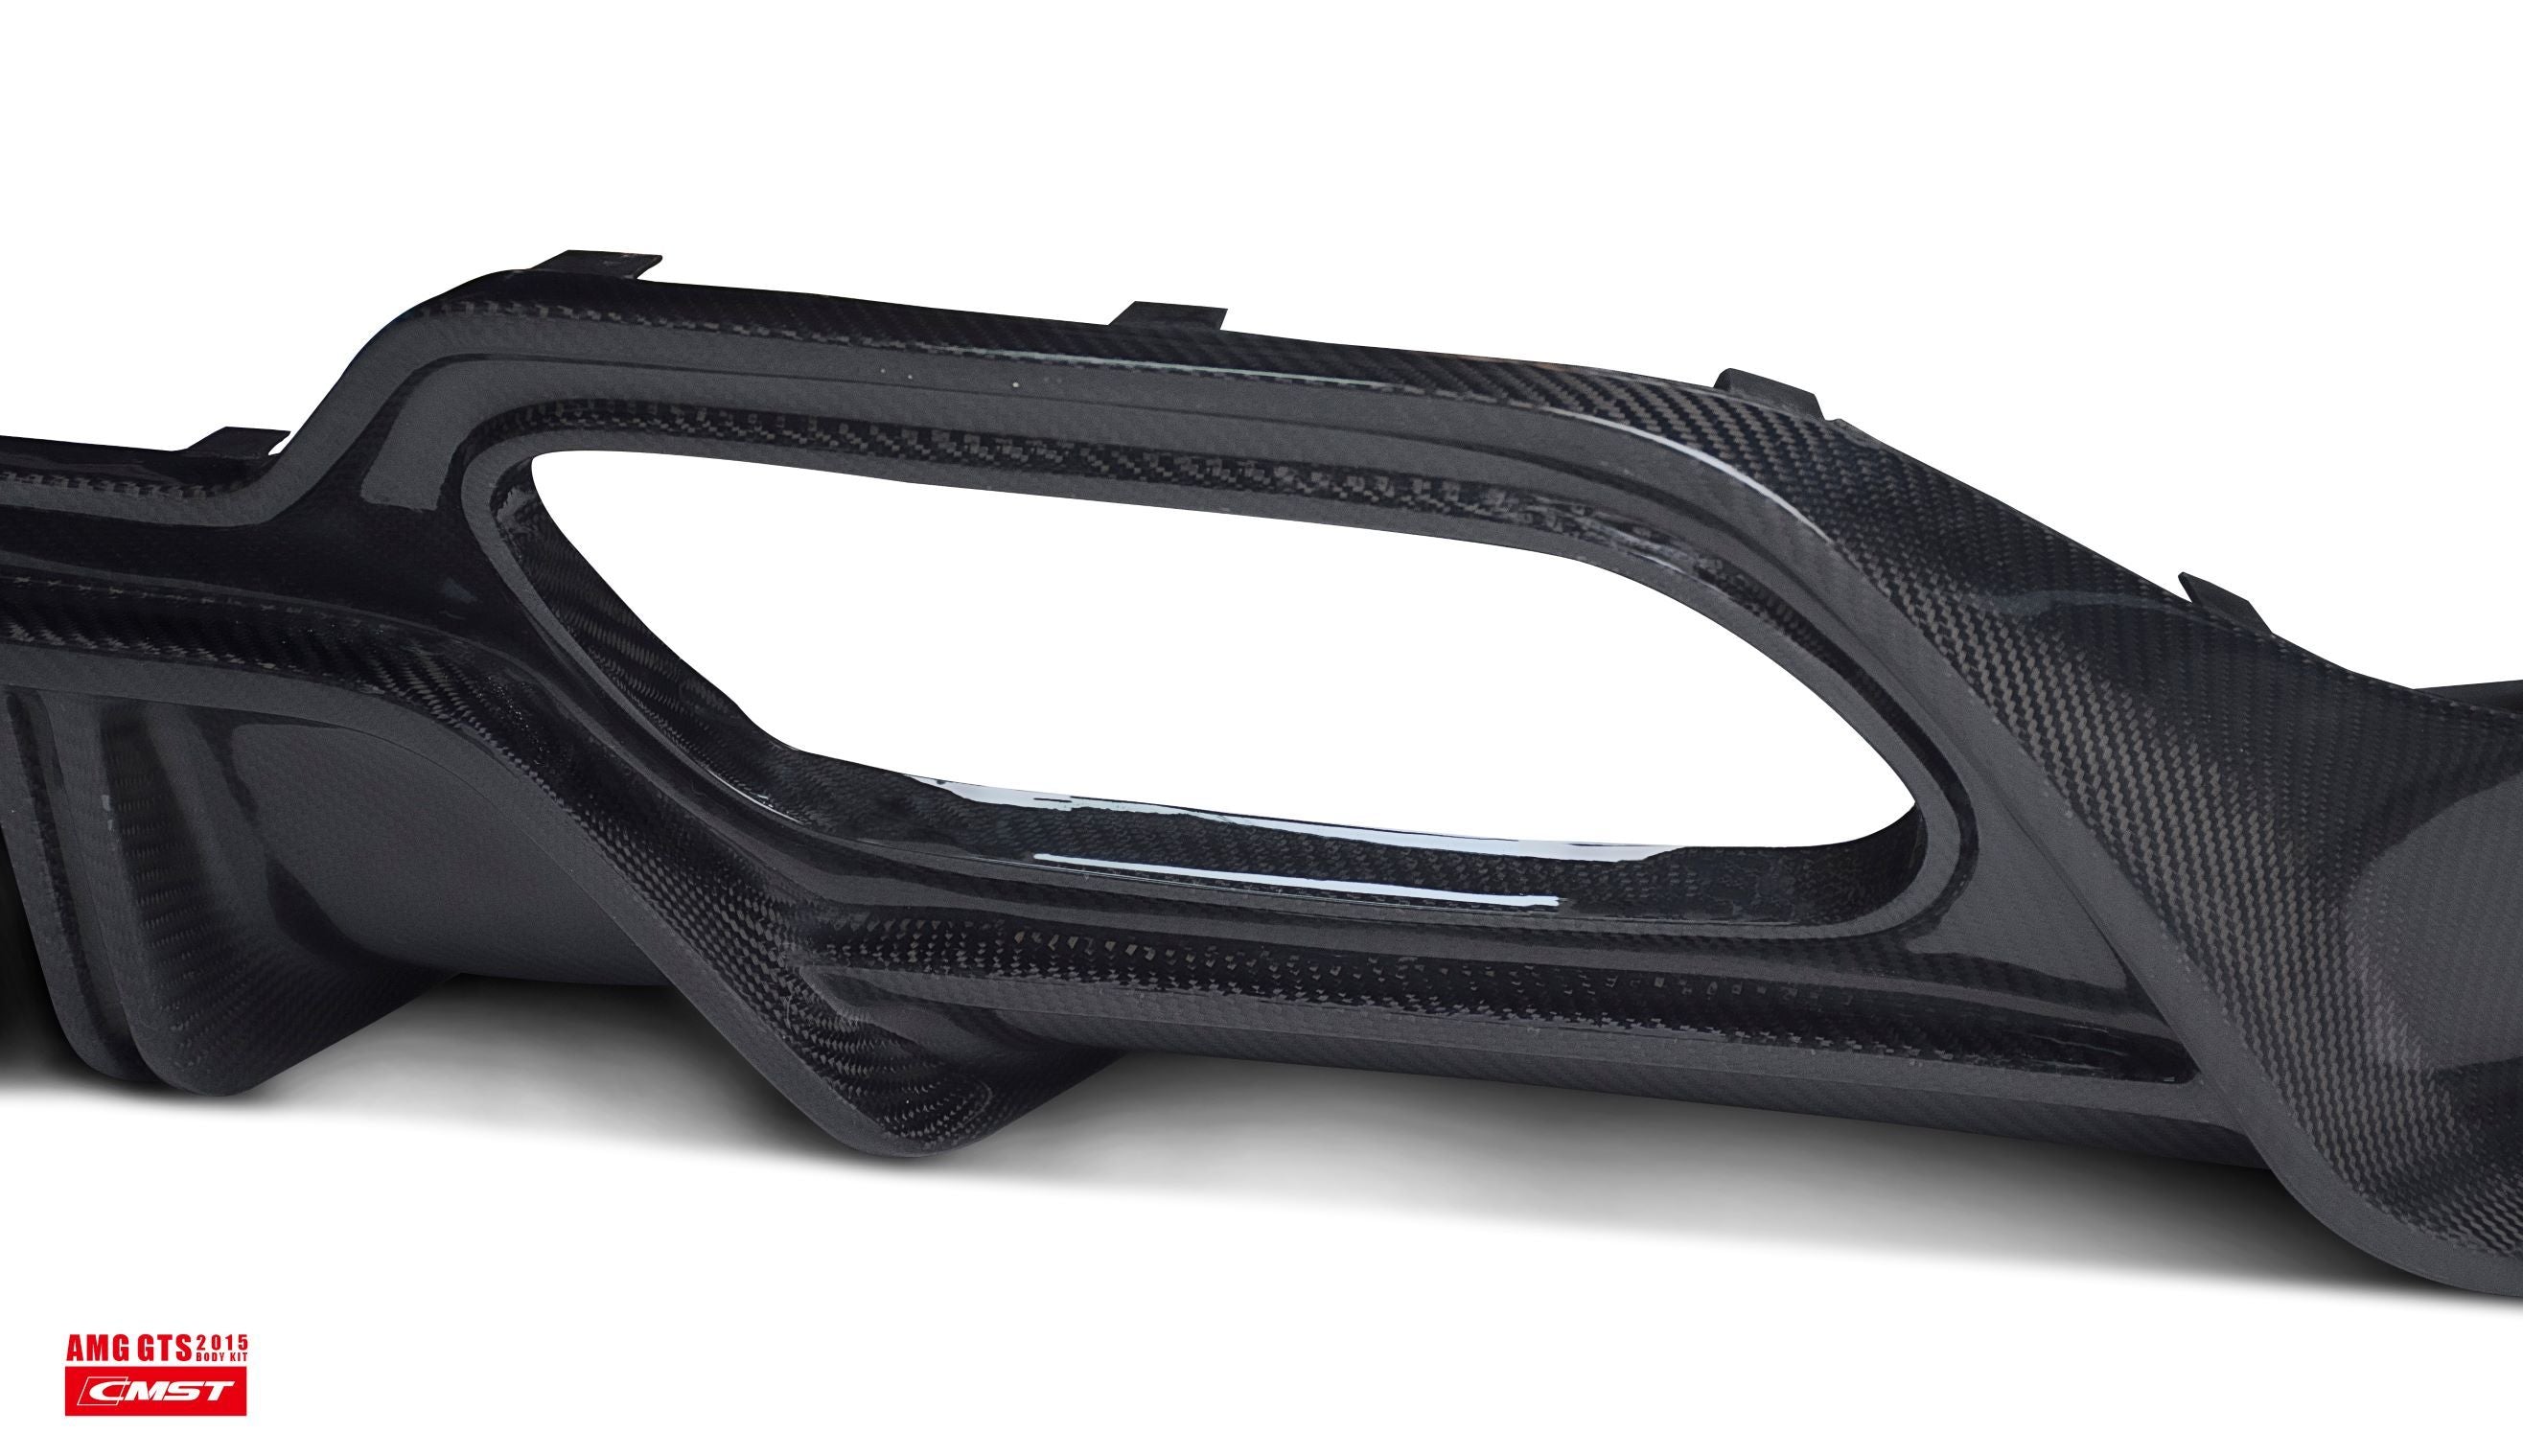 CMST Tuning Carbon Fiber Rear Diffuser for Mercedes Benz C190 AMG GT GTS 2015-ON